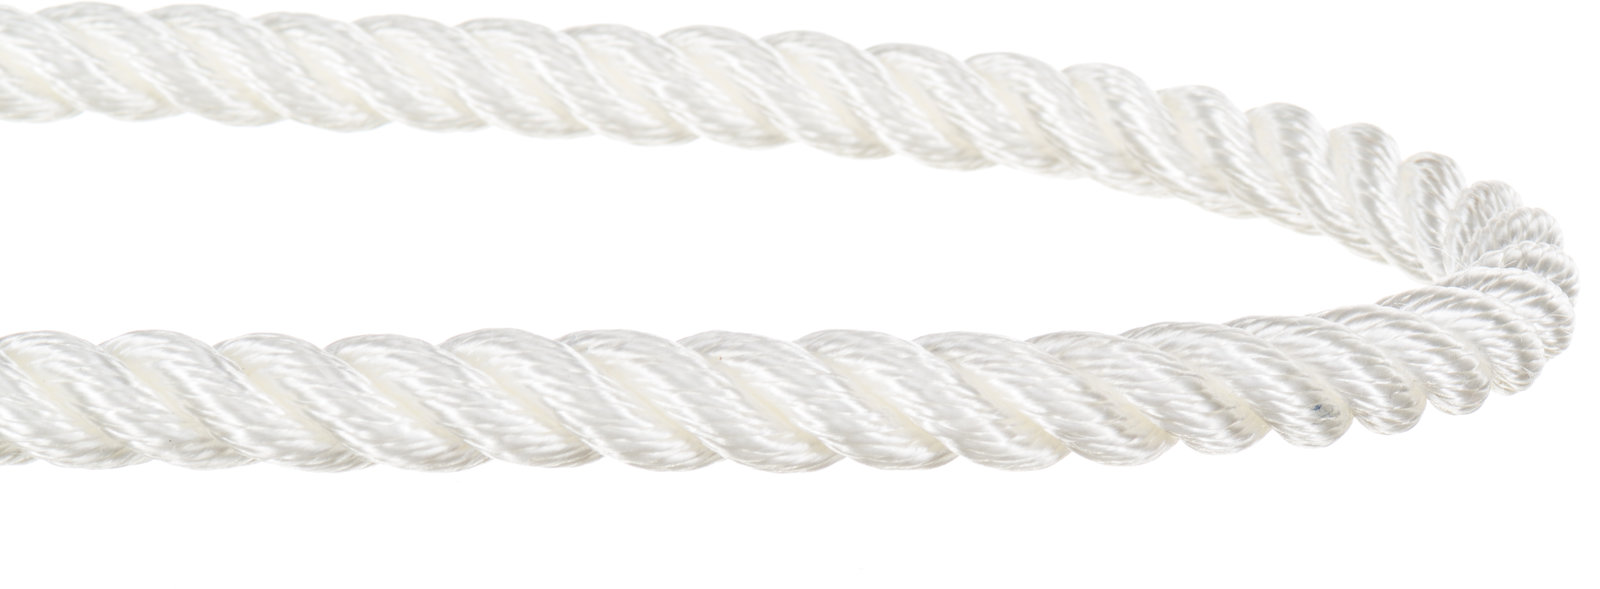 PolyDac 3 Strand ropes - Lowest prices, free shipping